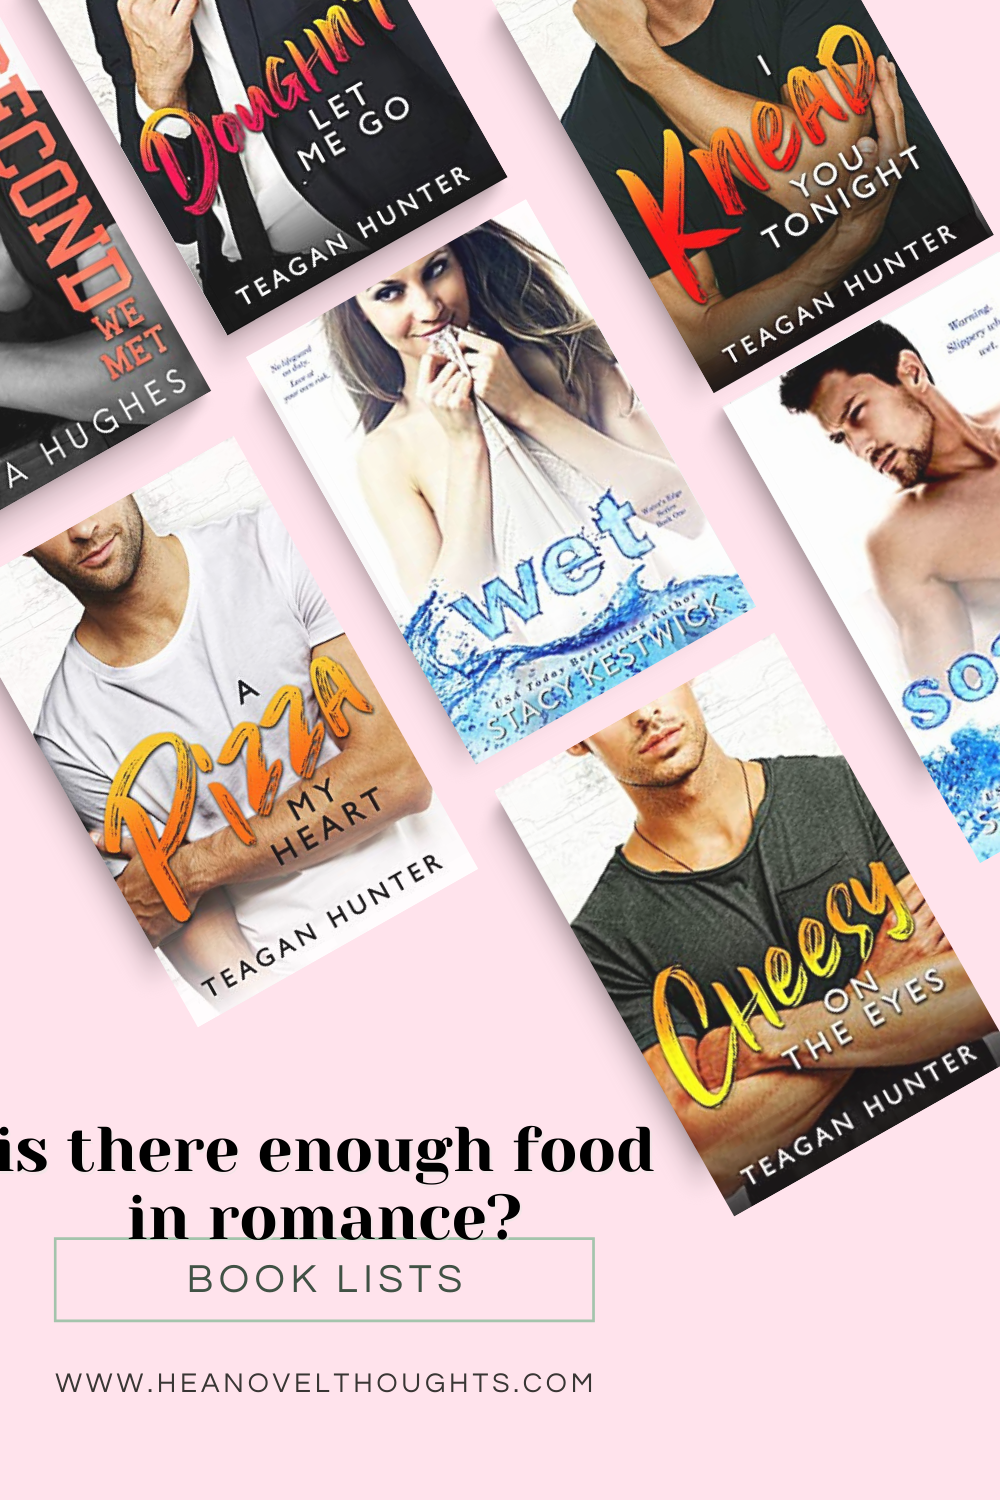 Is there enough food in romance?